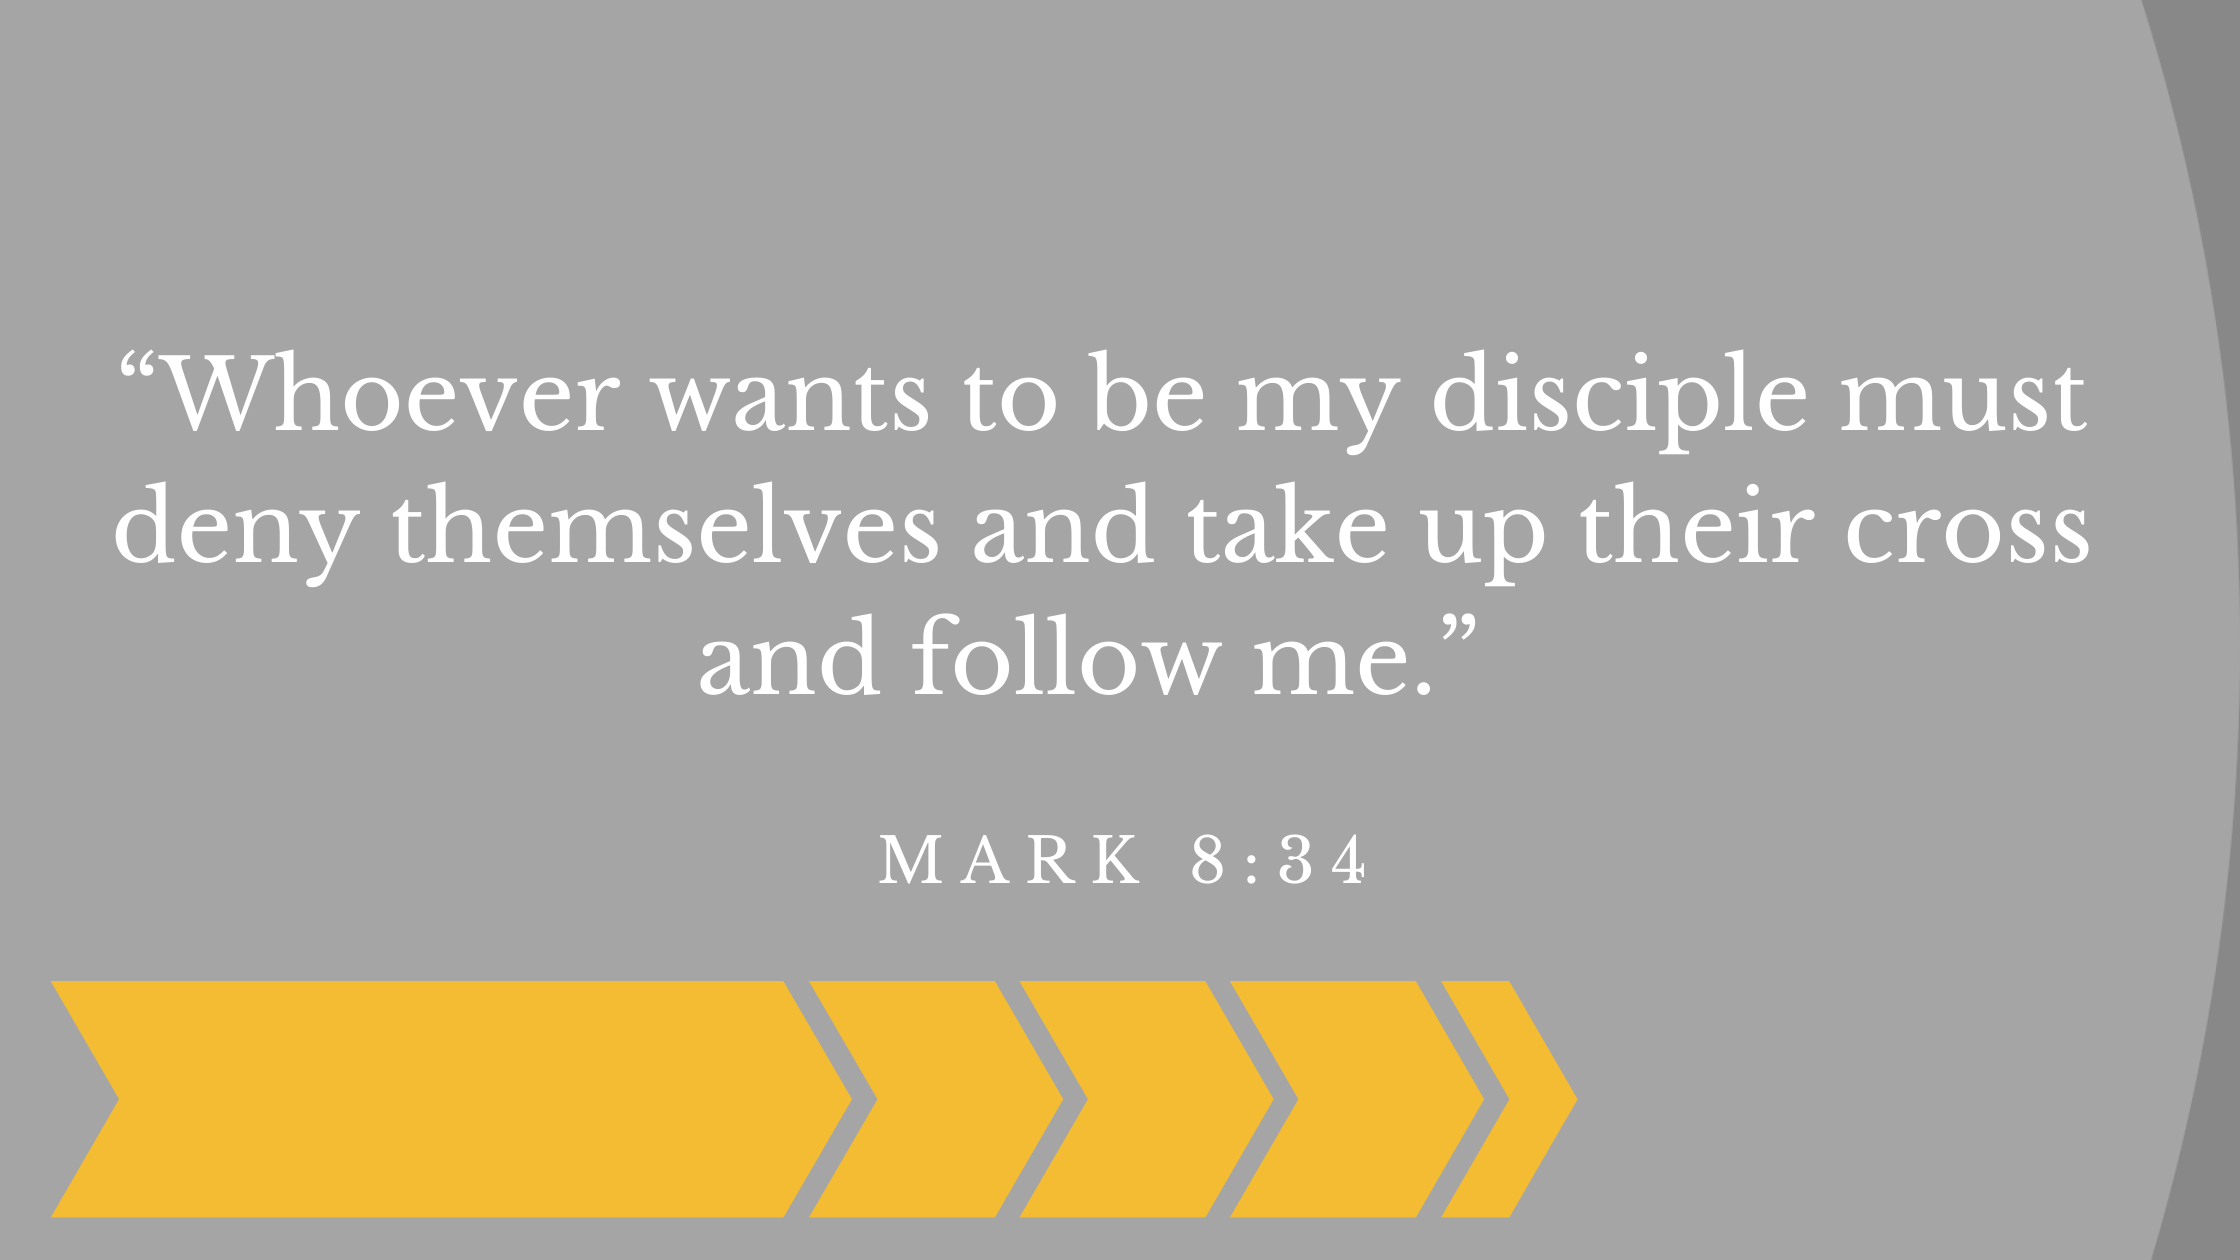 “Whoever wants to be my disciple must deny themselves and take up their cross and follow me.” Mark 834